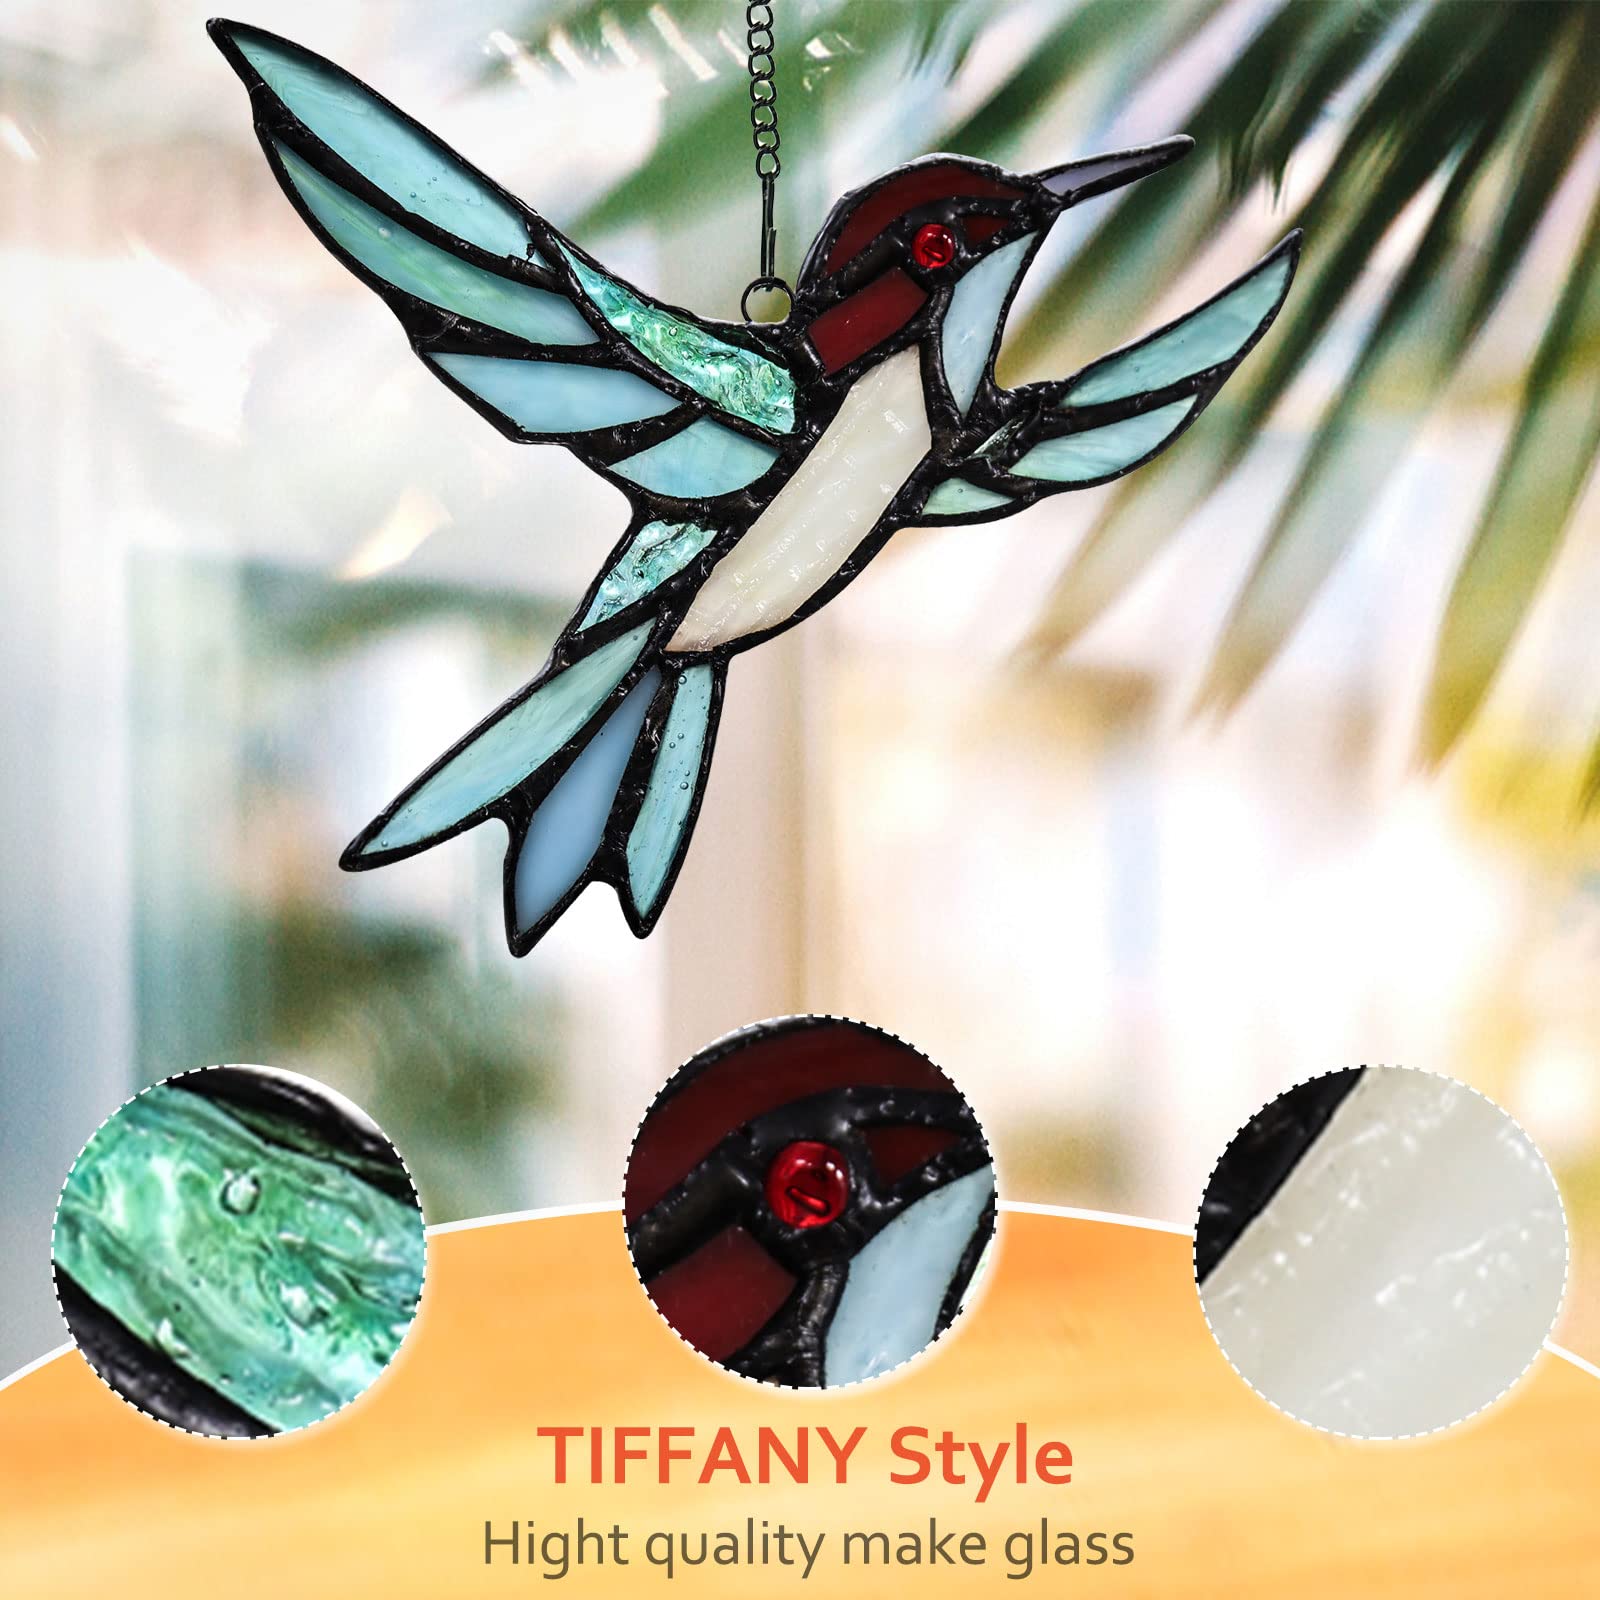 Stained Glass Hummingbird Window Hangings Handcrafted Tiffany Style Sun Cat - 1